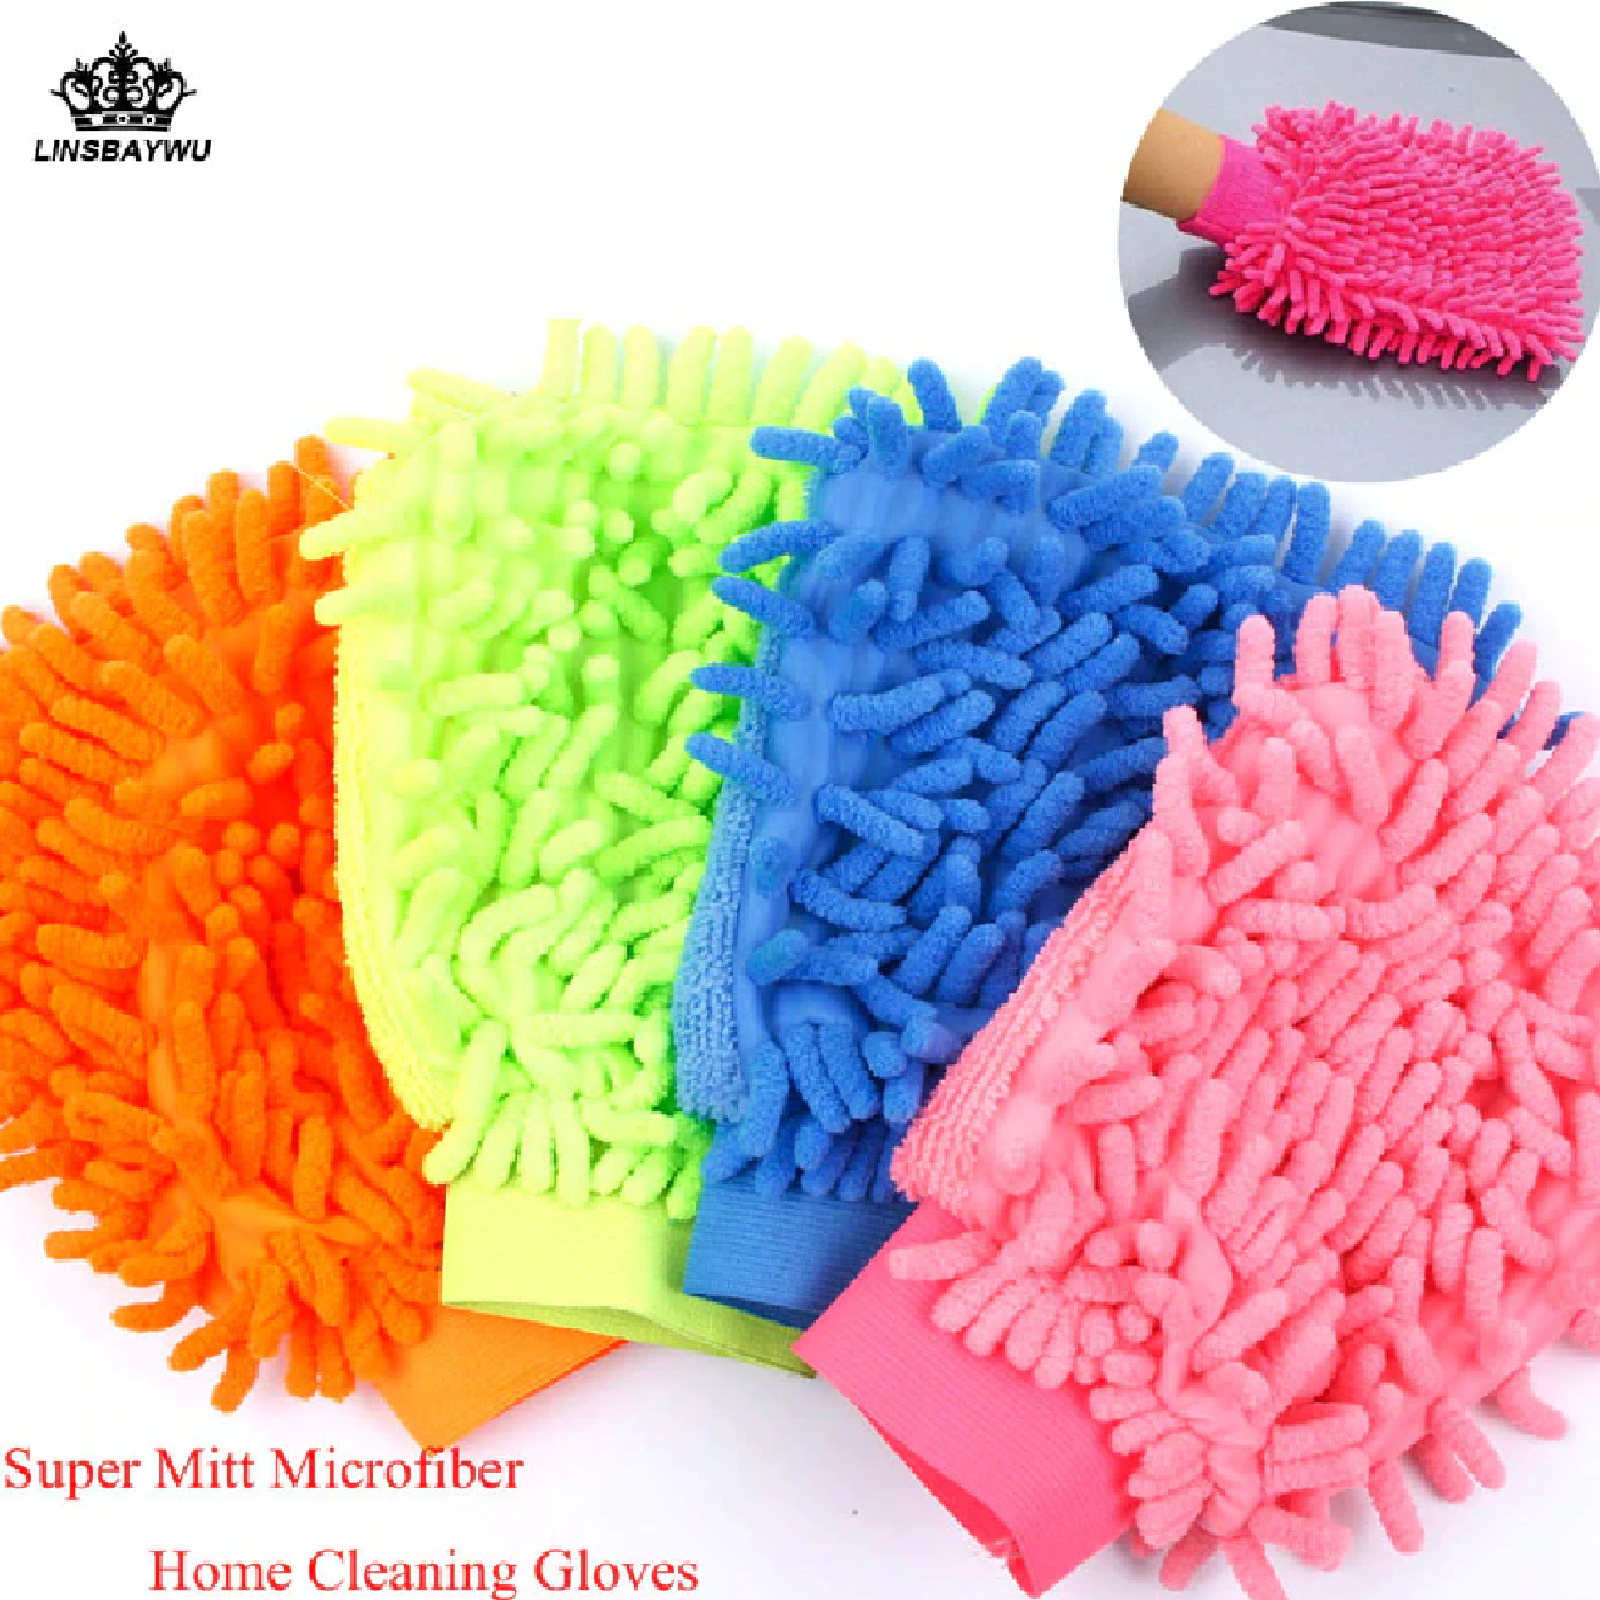 Superio Hand Duster for Cleaning, Rainbow Colored Dust Remover, Home,  Office, Dust and Dirt Refresher